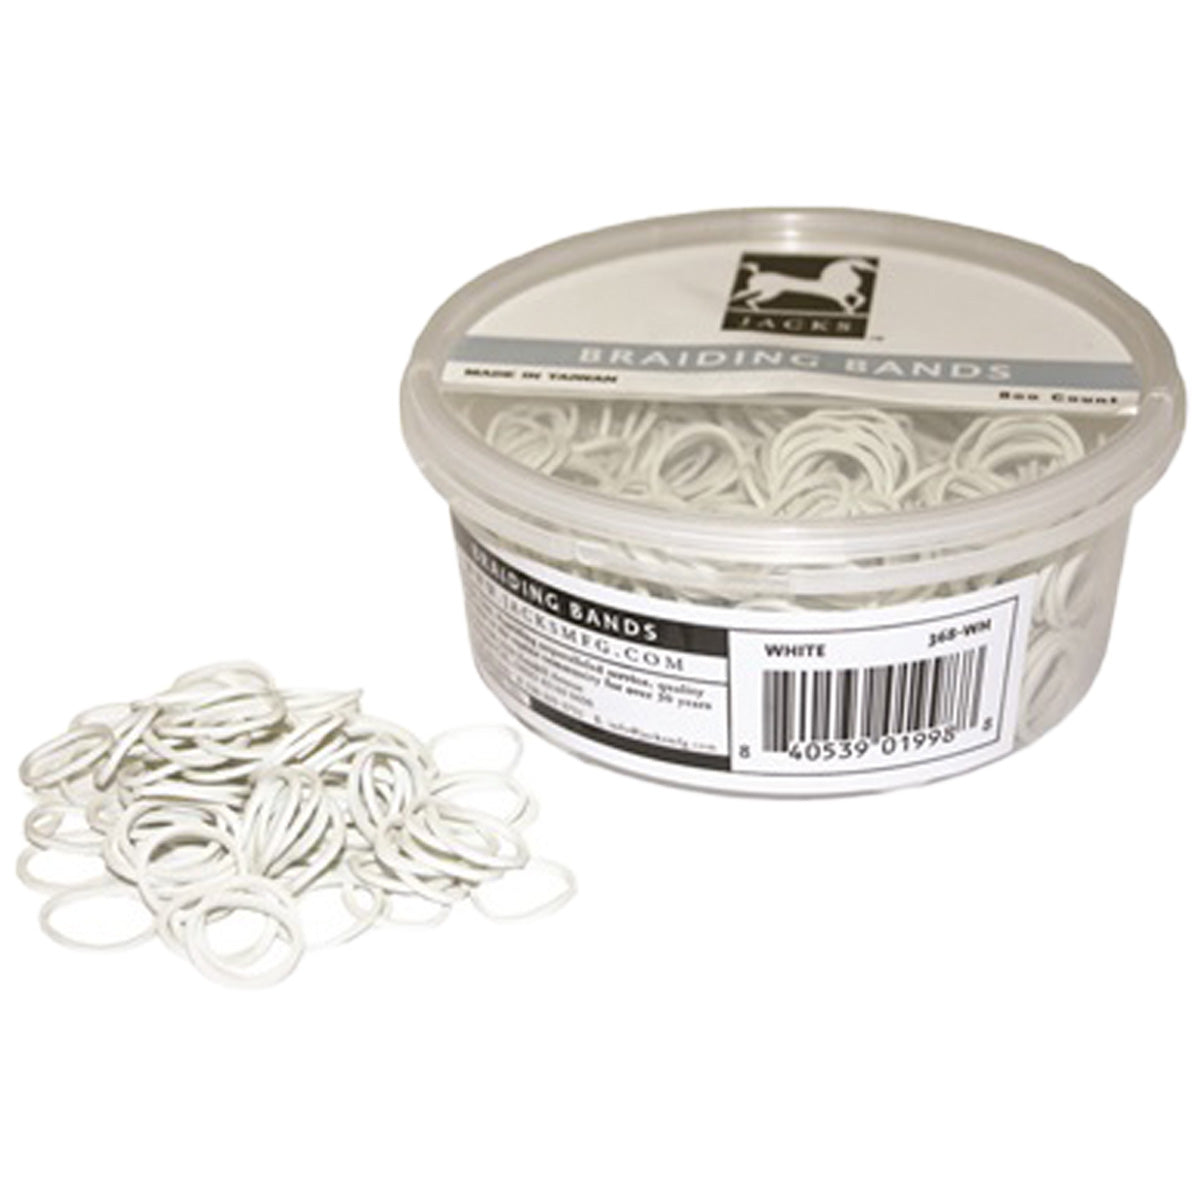 Braiding Bands - 800 Count